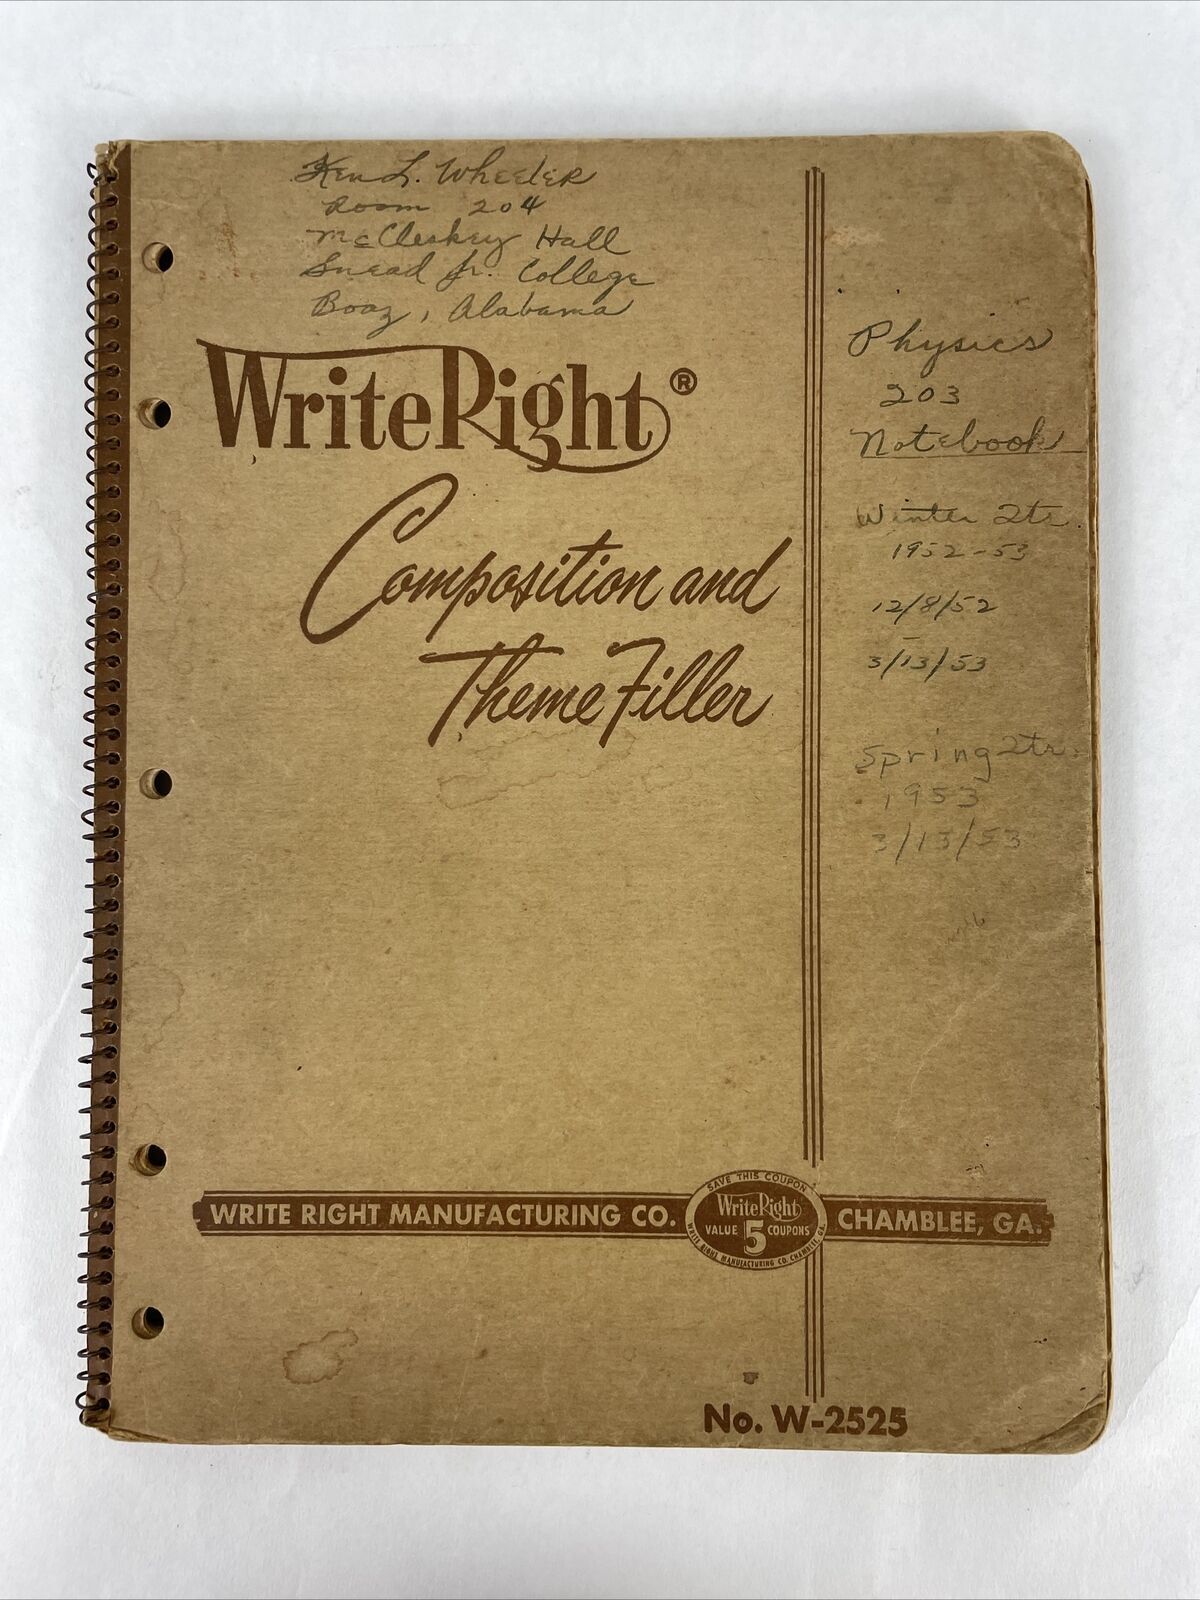 Vintage Physics 203 Student Notebook, Winter 1952, Spring 1953, With Notes